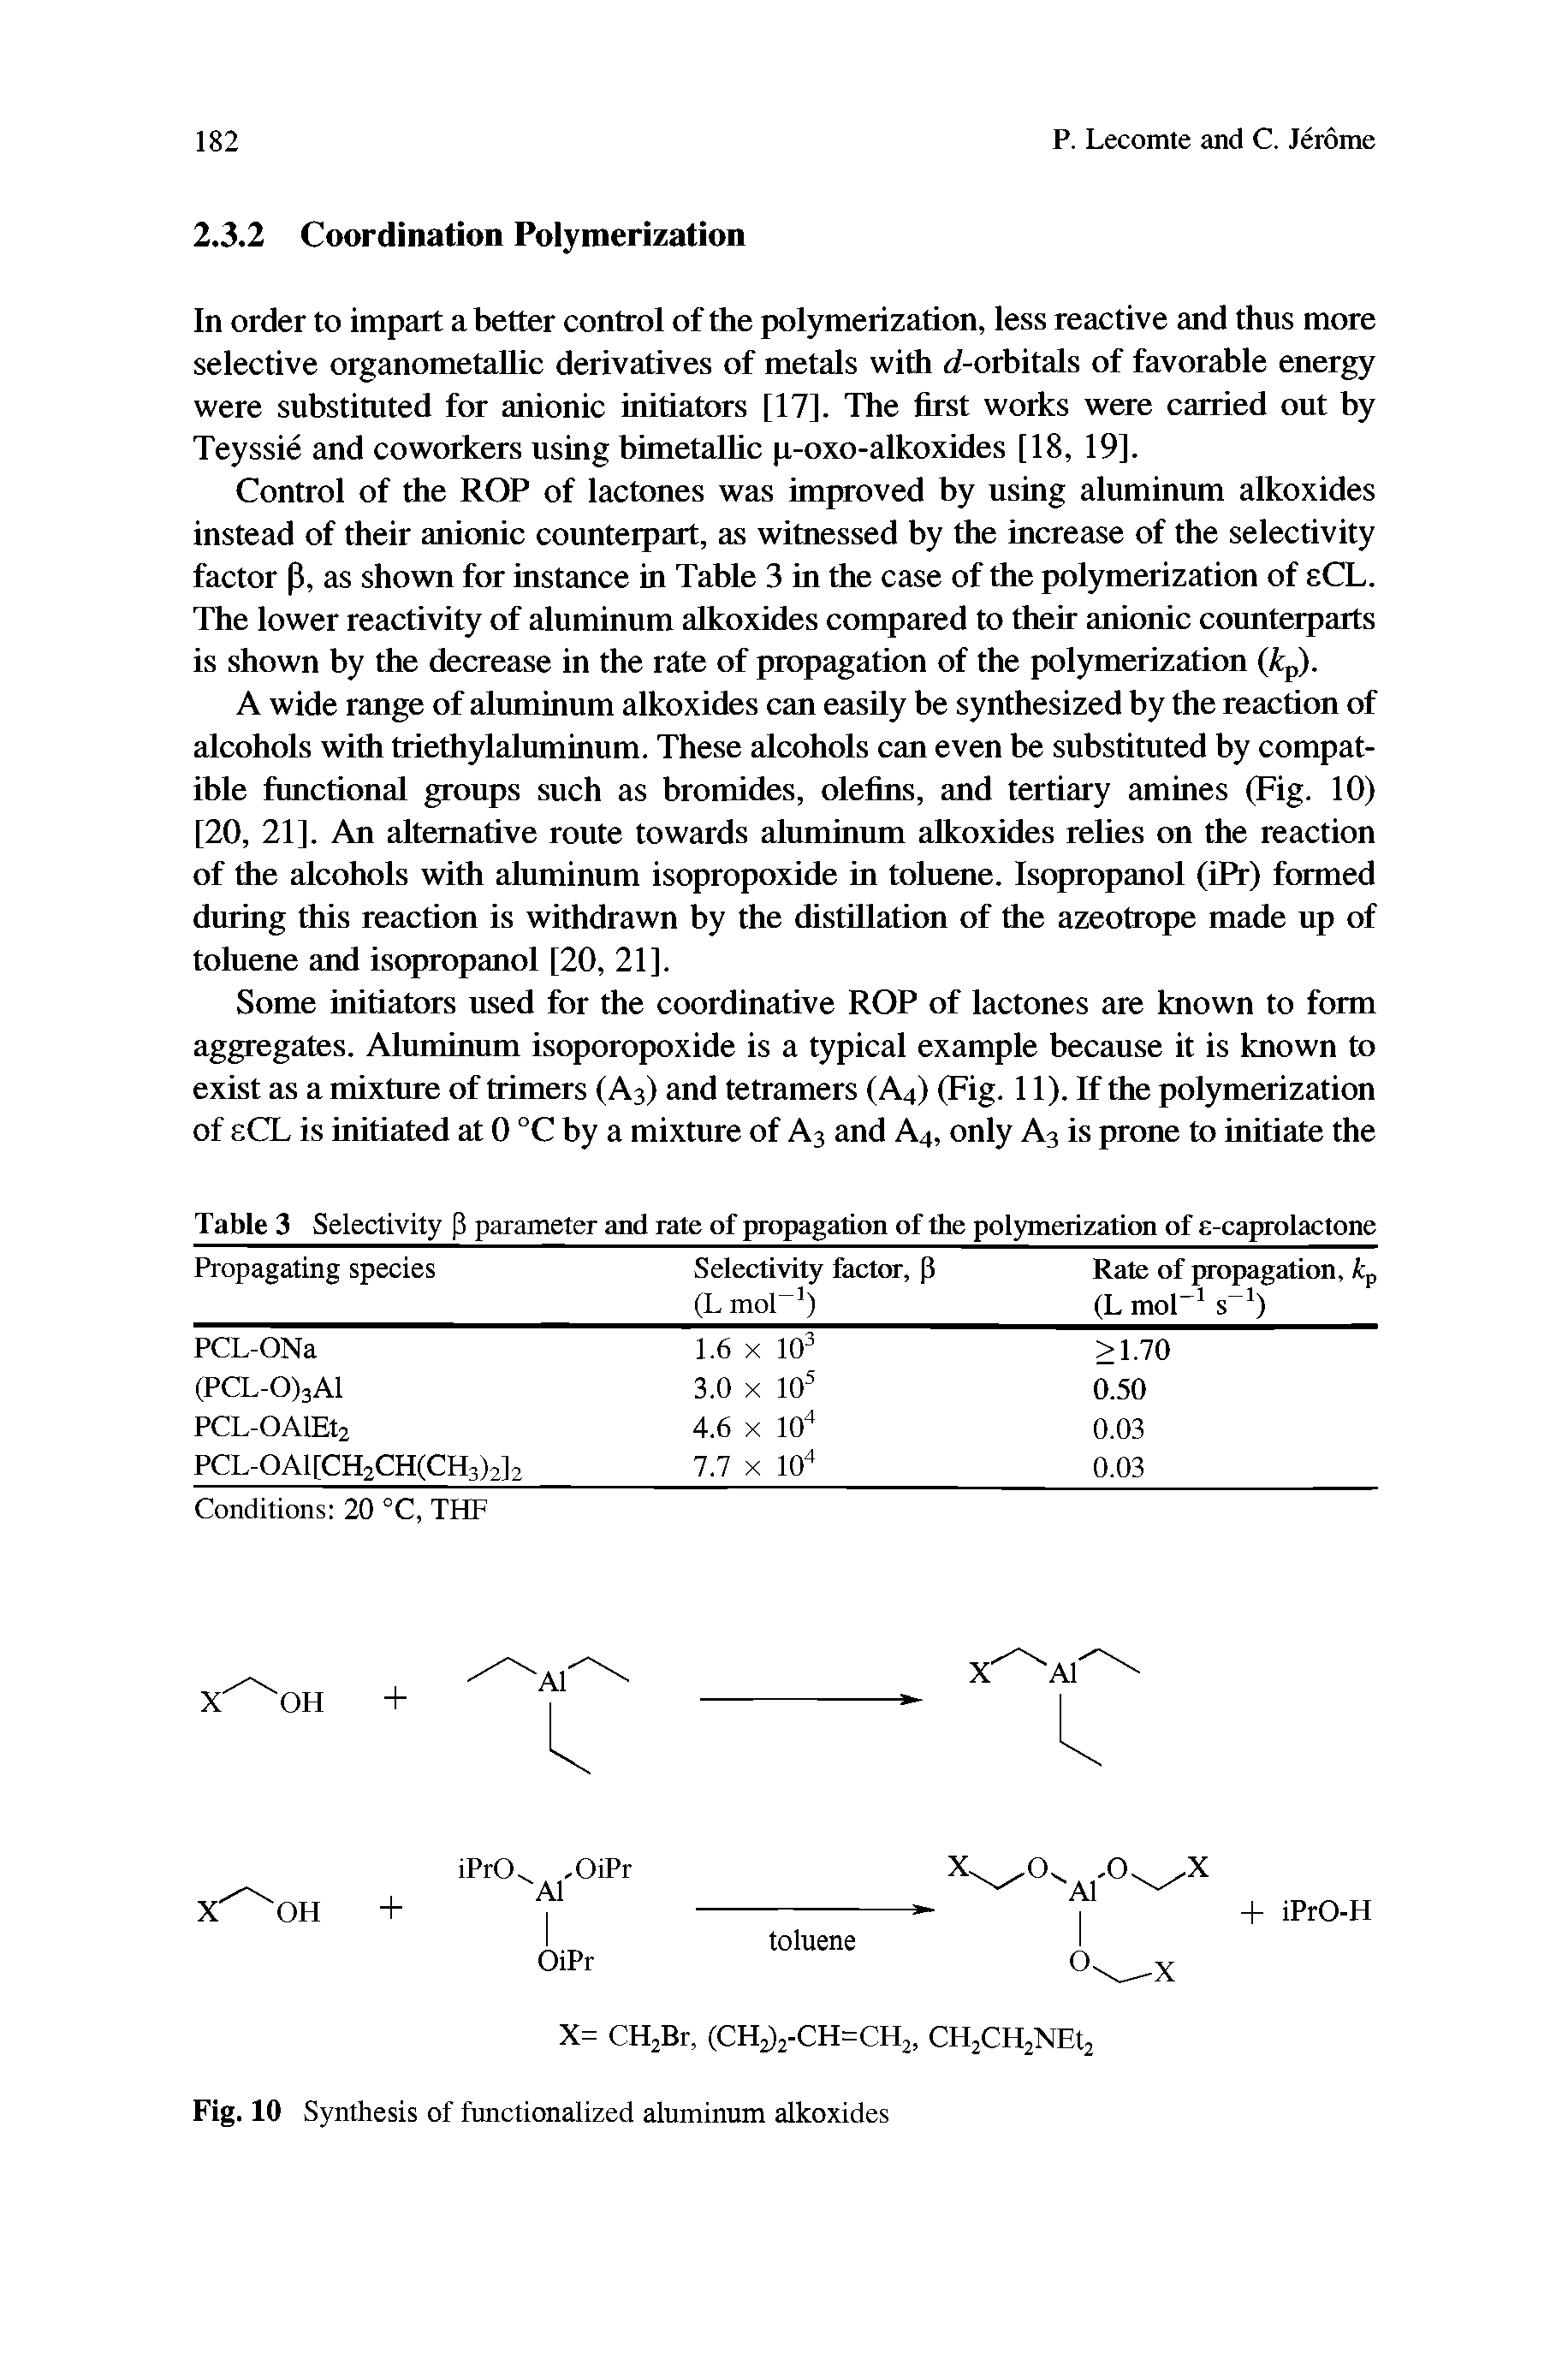 Table 3 Selectivity (3 parameter and rate of propagation of the polymerization of e-caprolactone...